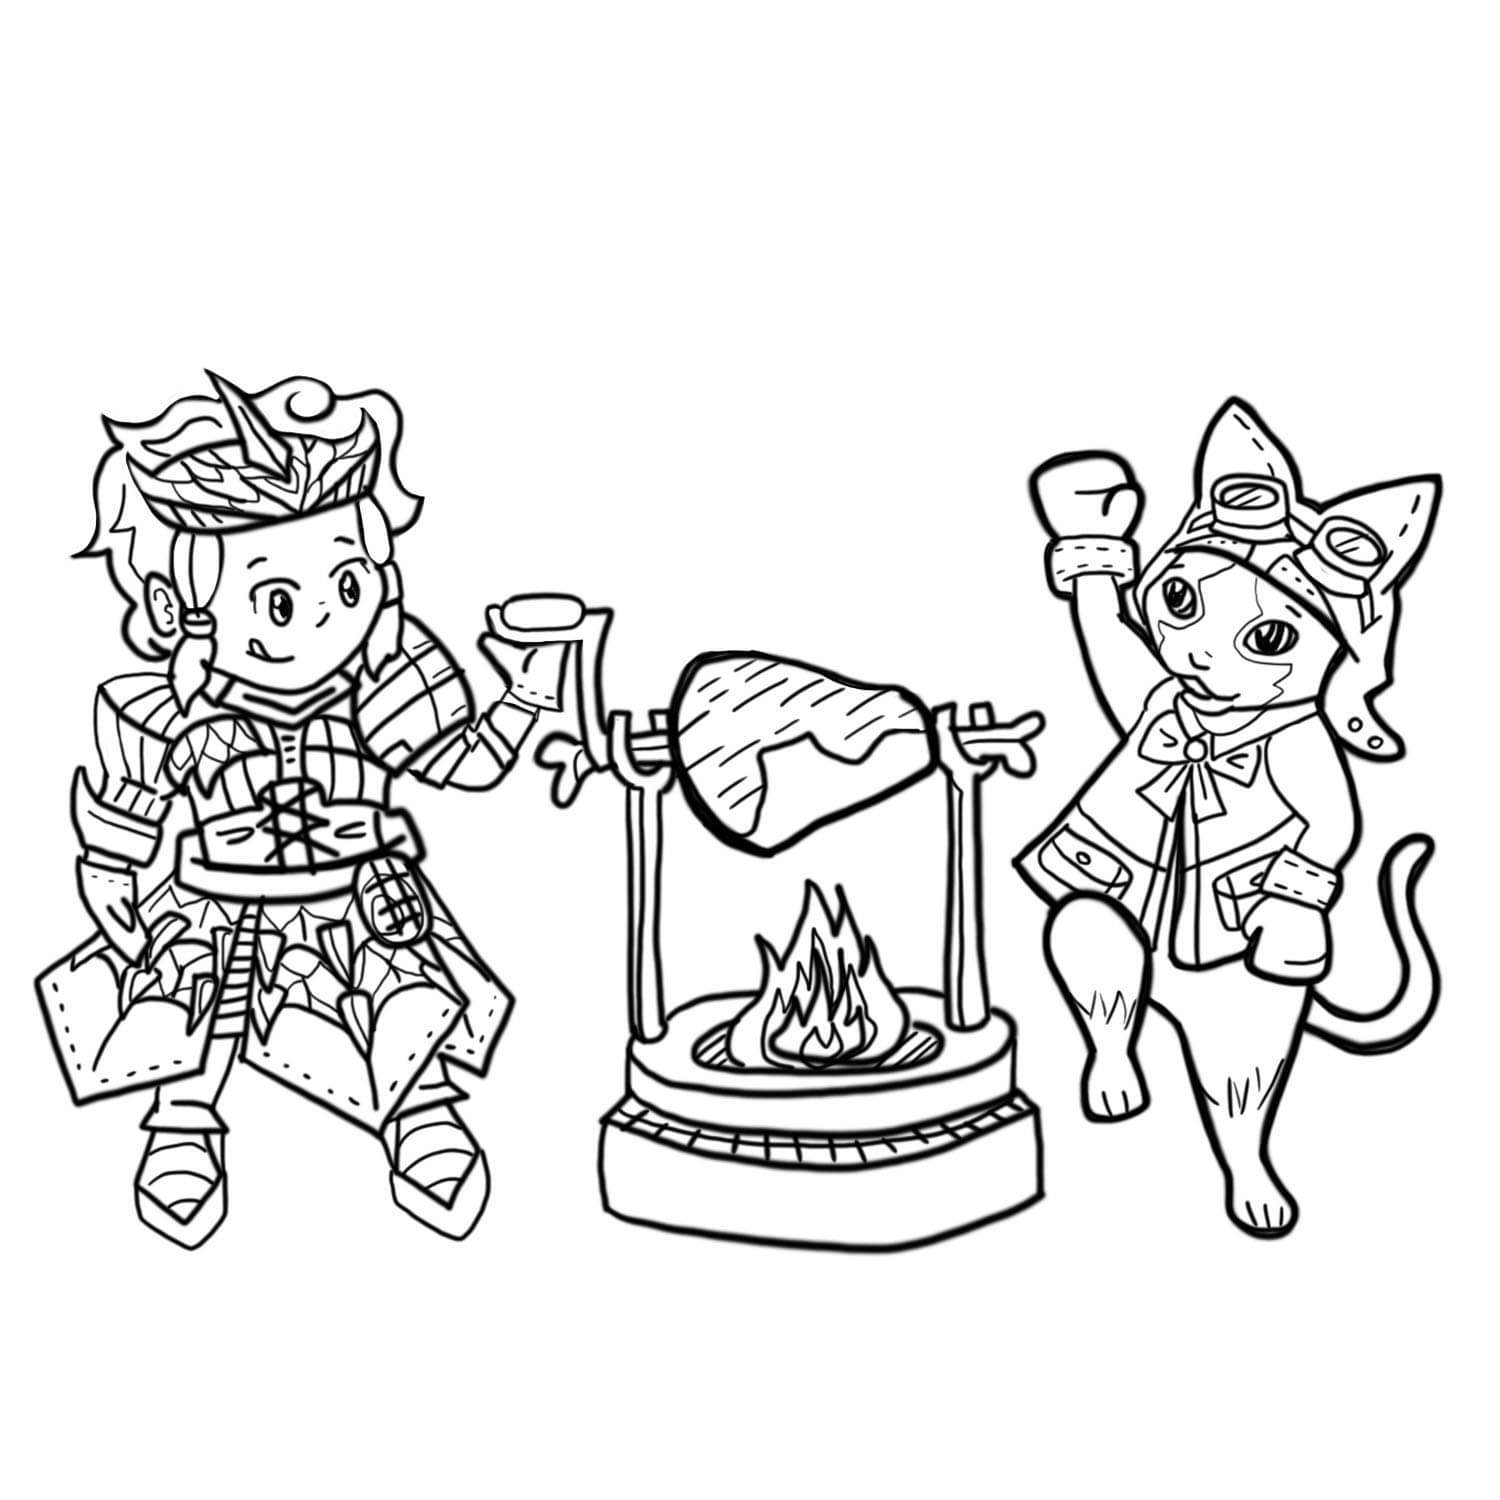 3. Roasted Baby hunter roasts a well done steak with the help of her trusty Palico. Mm, so tasty!